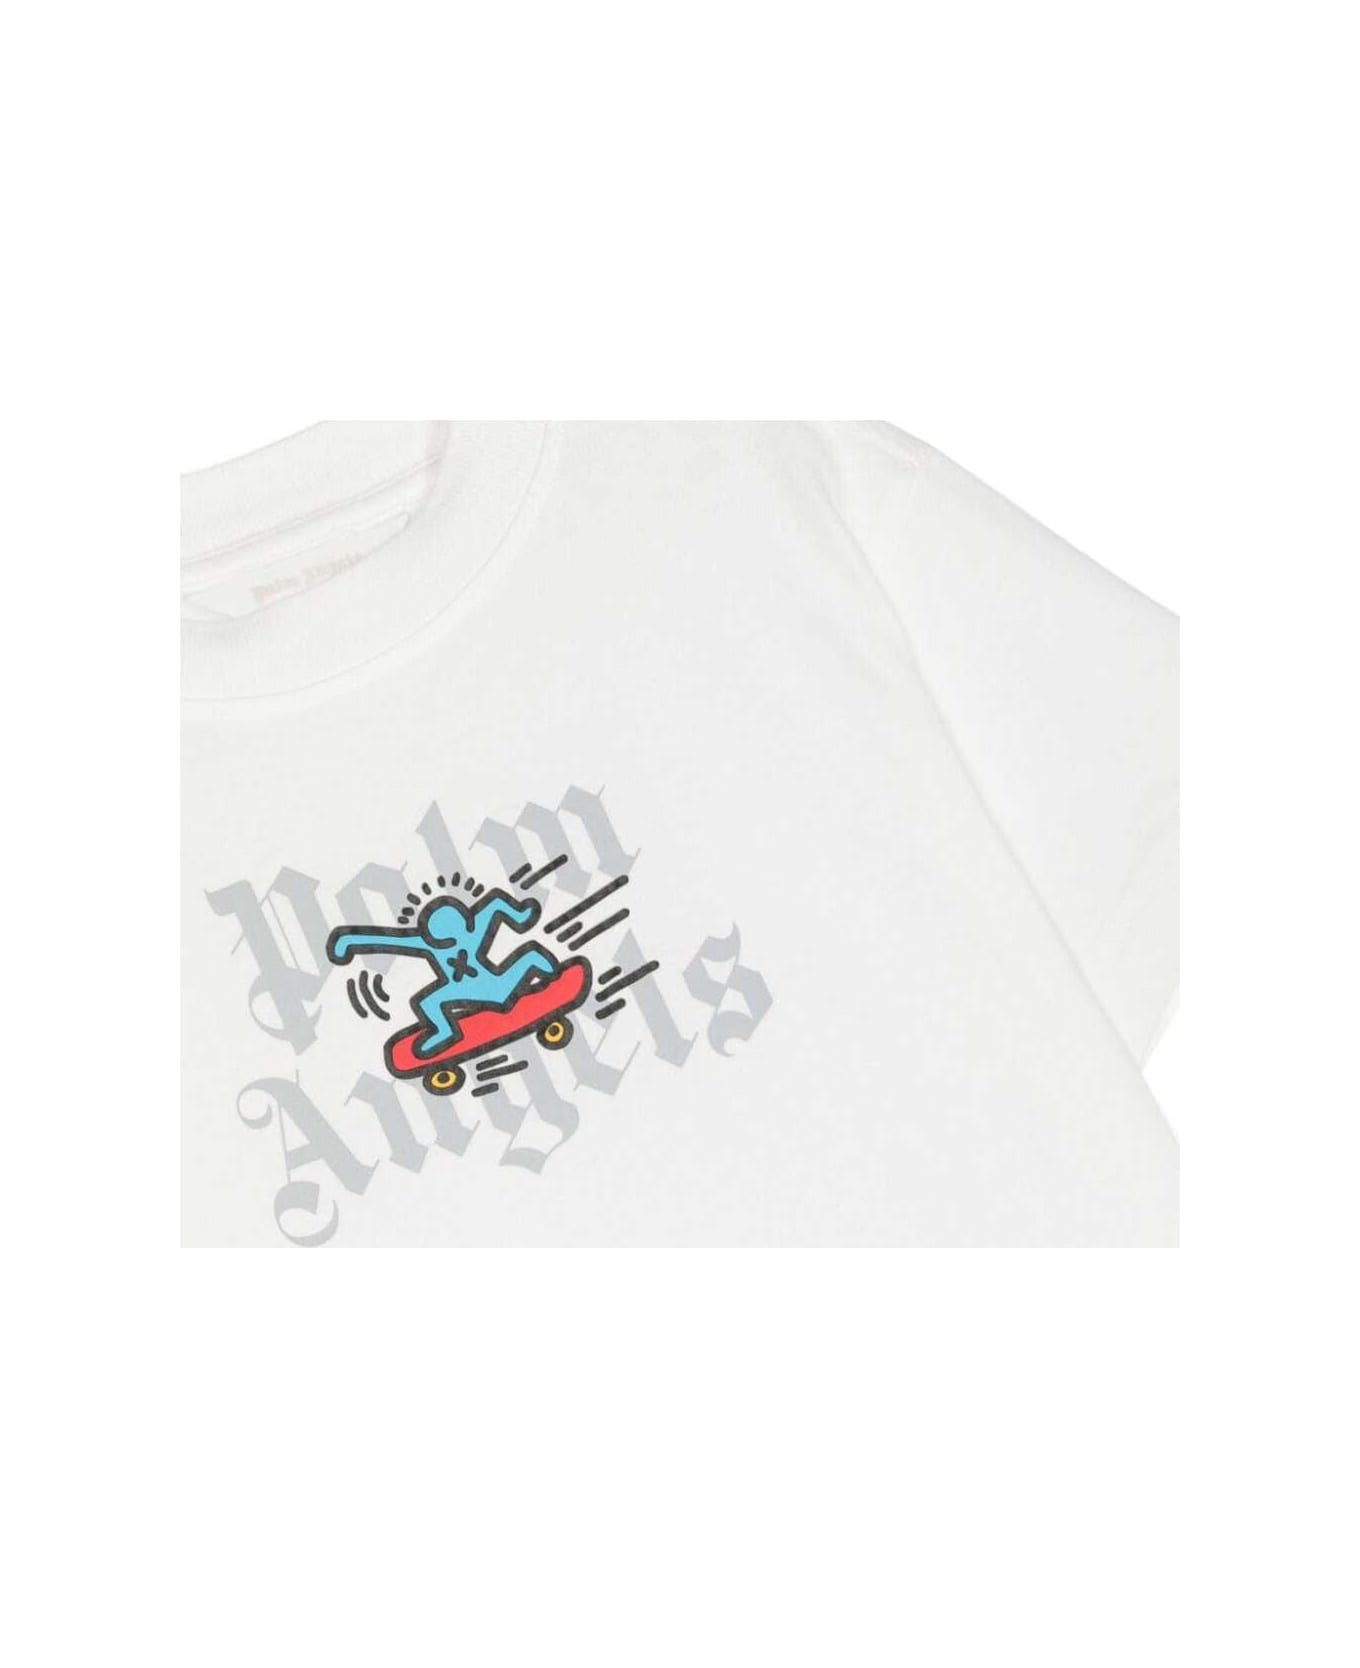 Palm Angels White T-shirt With Skateboard Print In Cotton Boy - White